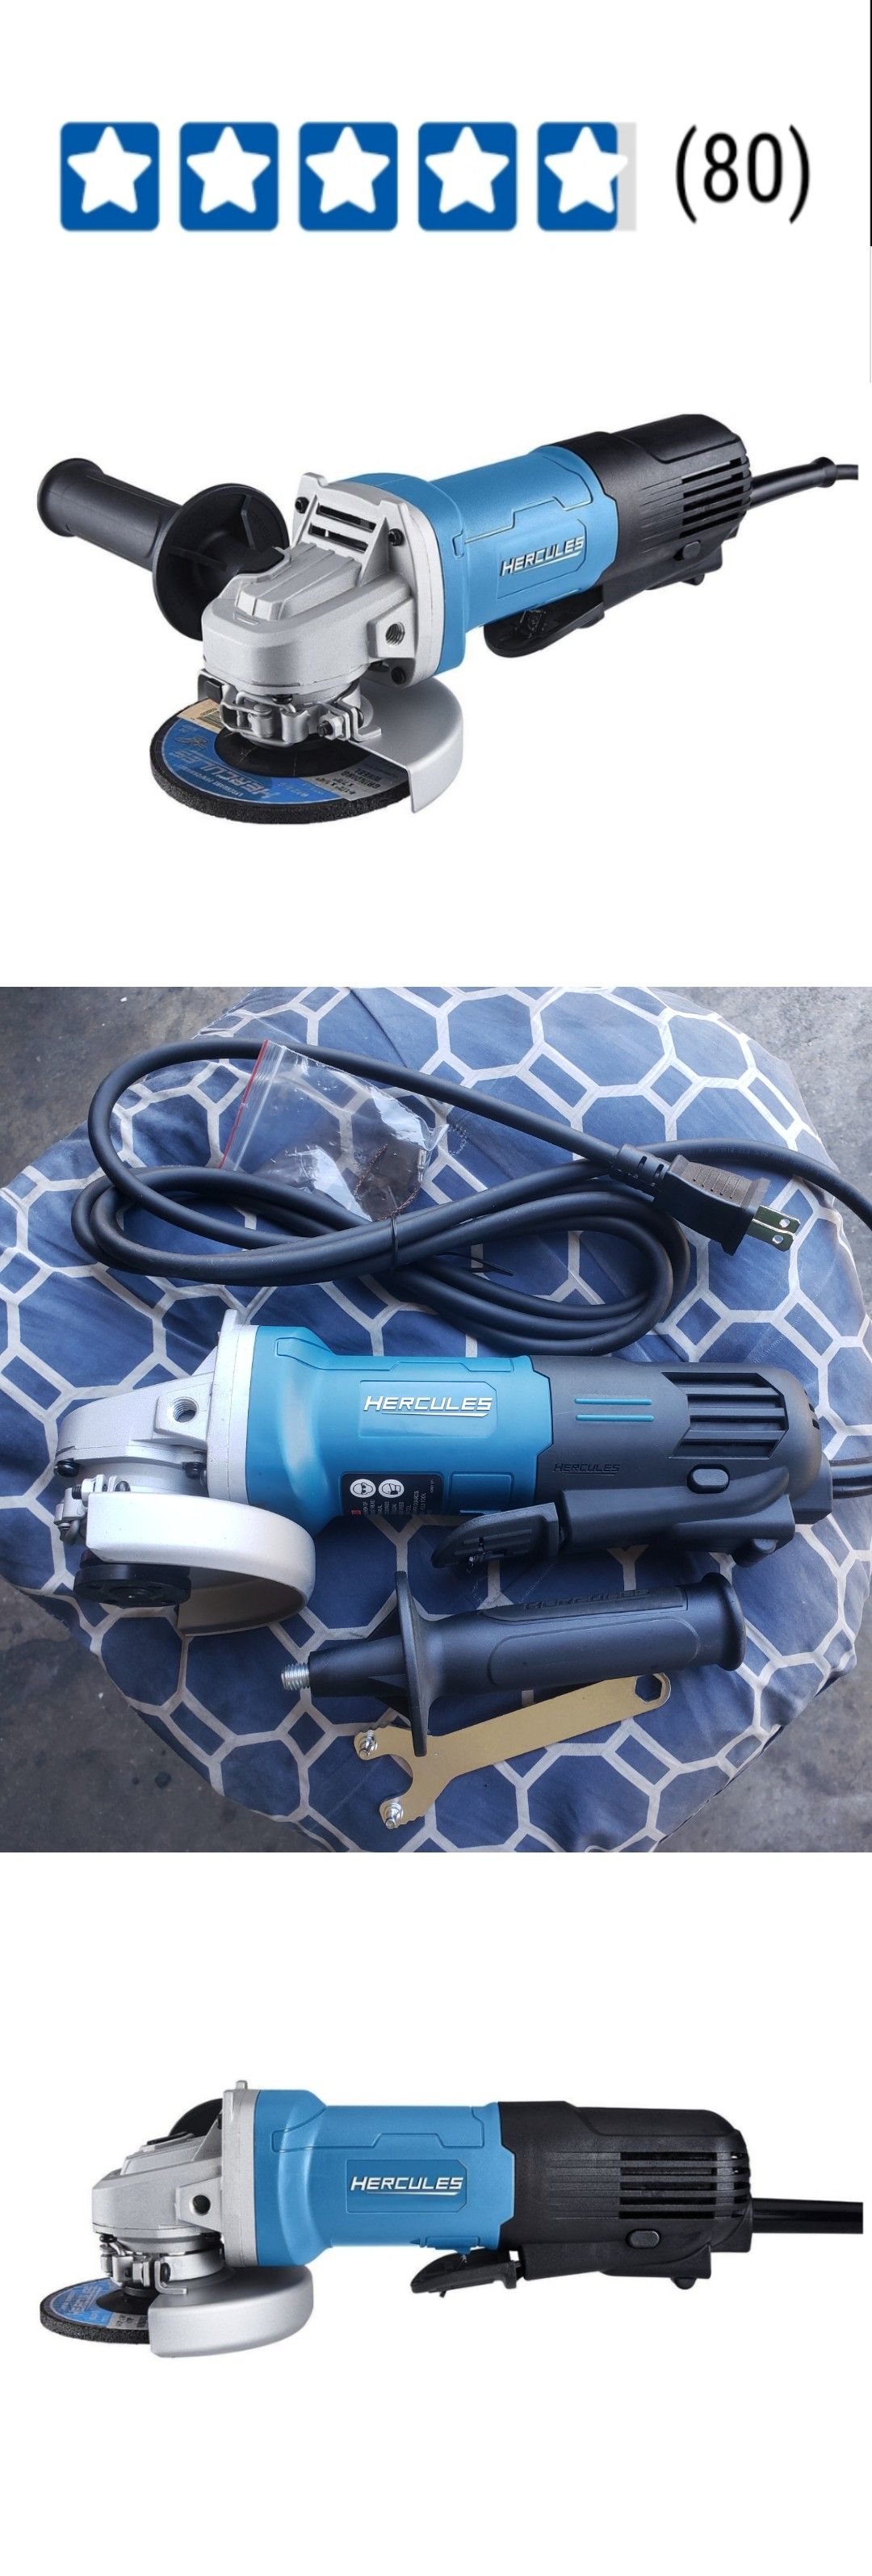 Corded 4-1/2 In. 11 Amp Professional Paddle Switch Angle Grinder Powerful 11 Amp motor delivers 11,000 RPM